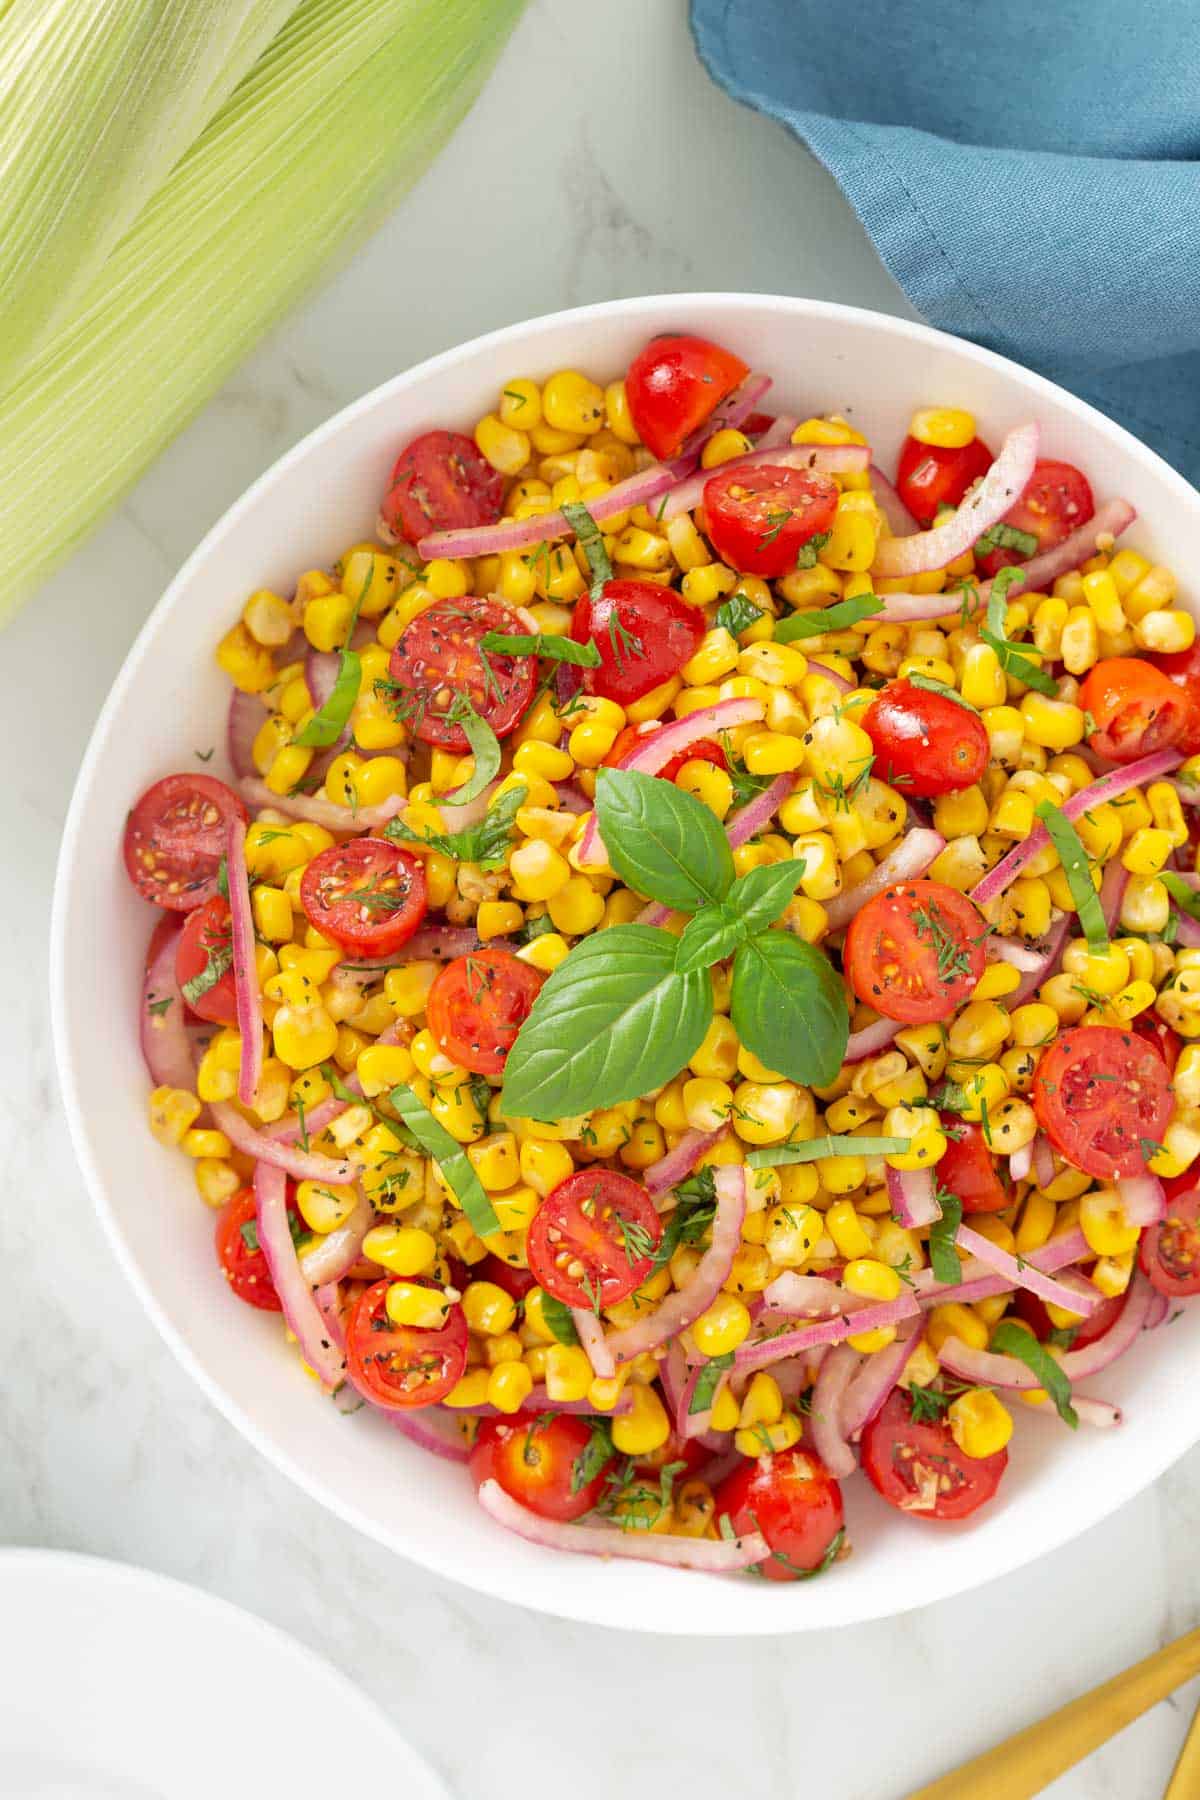 Corn Tomato salad garnished with fresh basil in a white bowl.